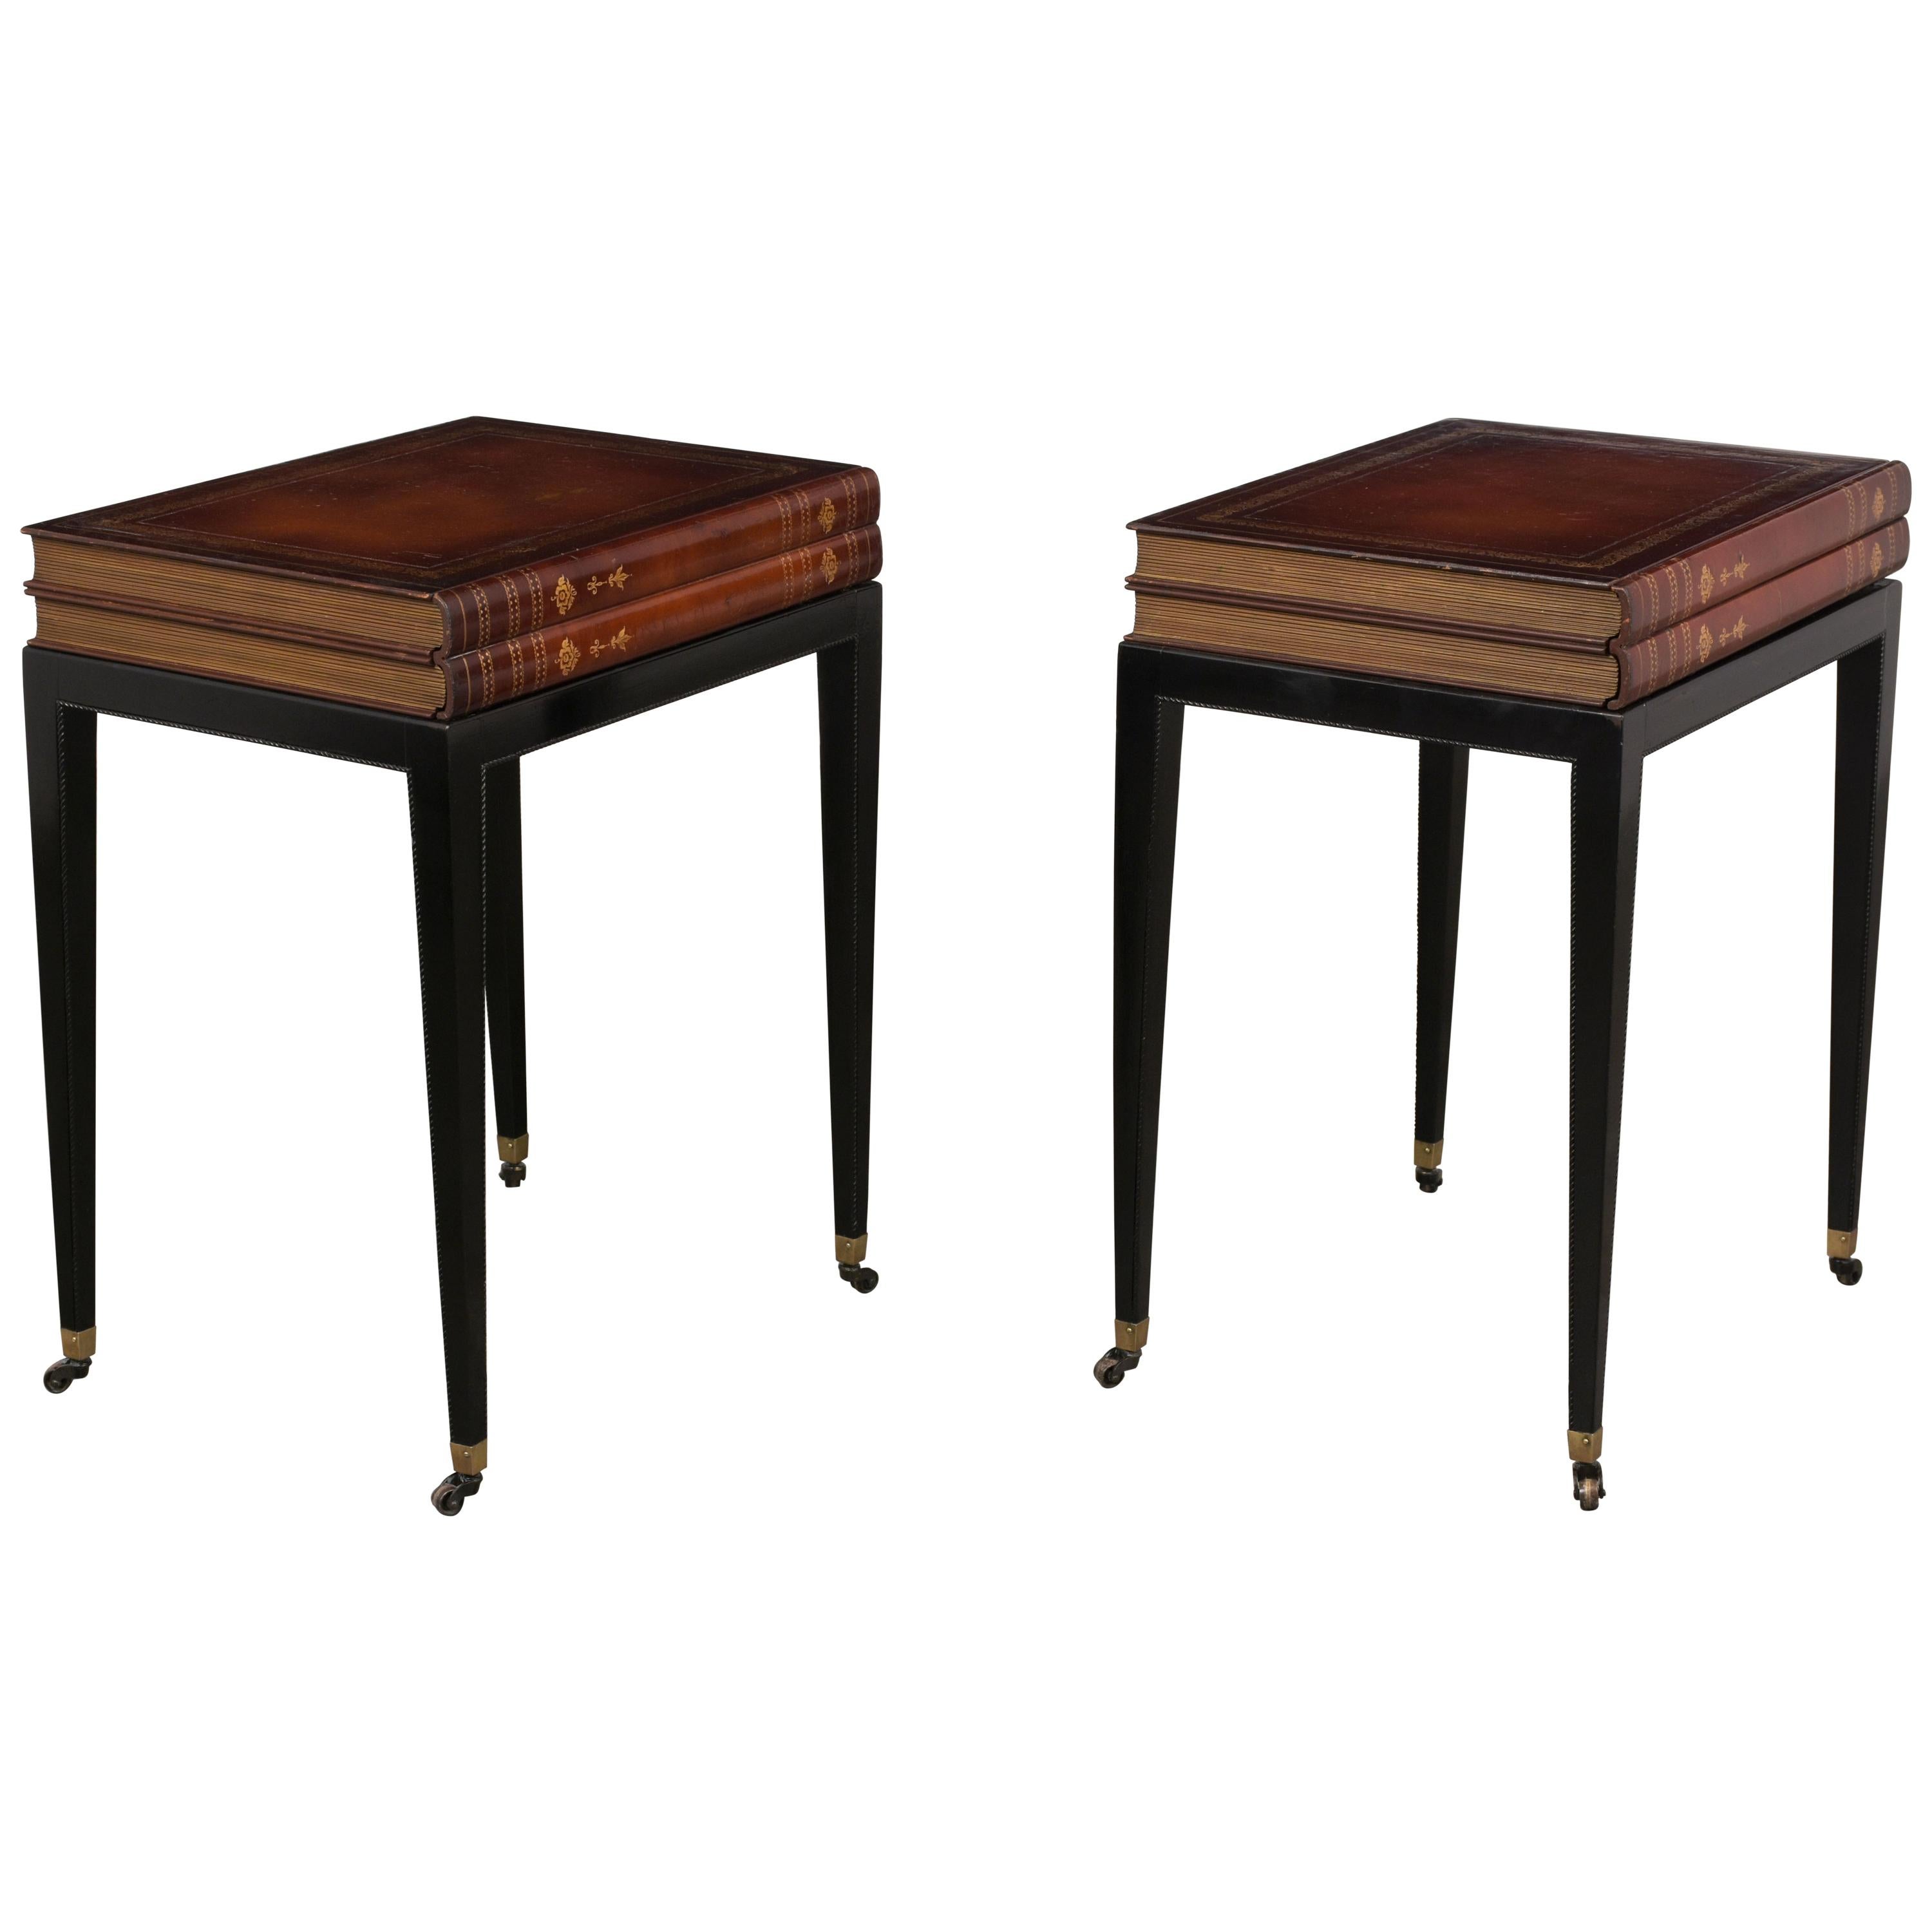 Set of Two Unique Book Design Side Tables in Regency Style